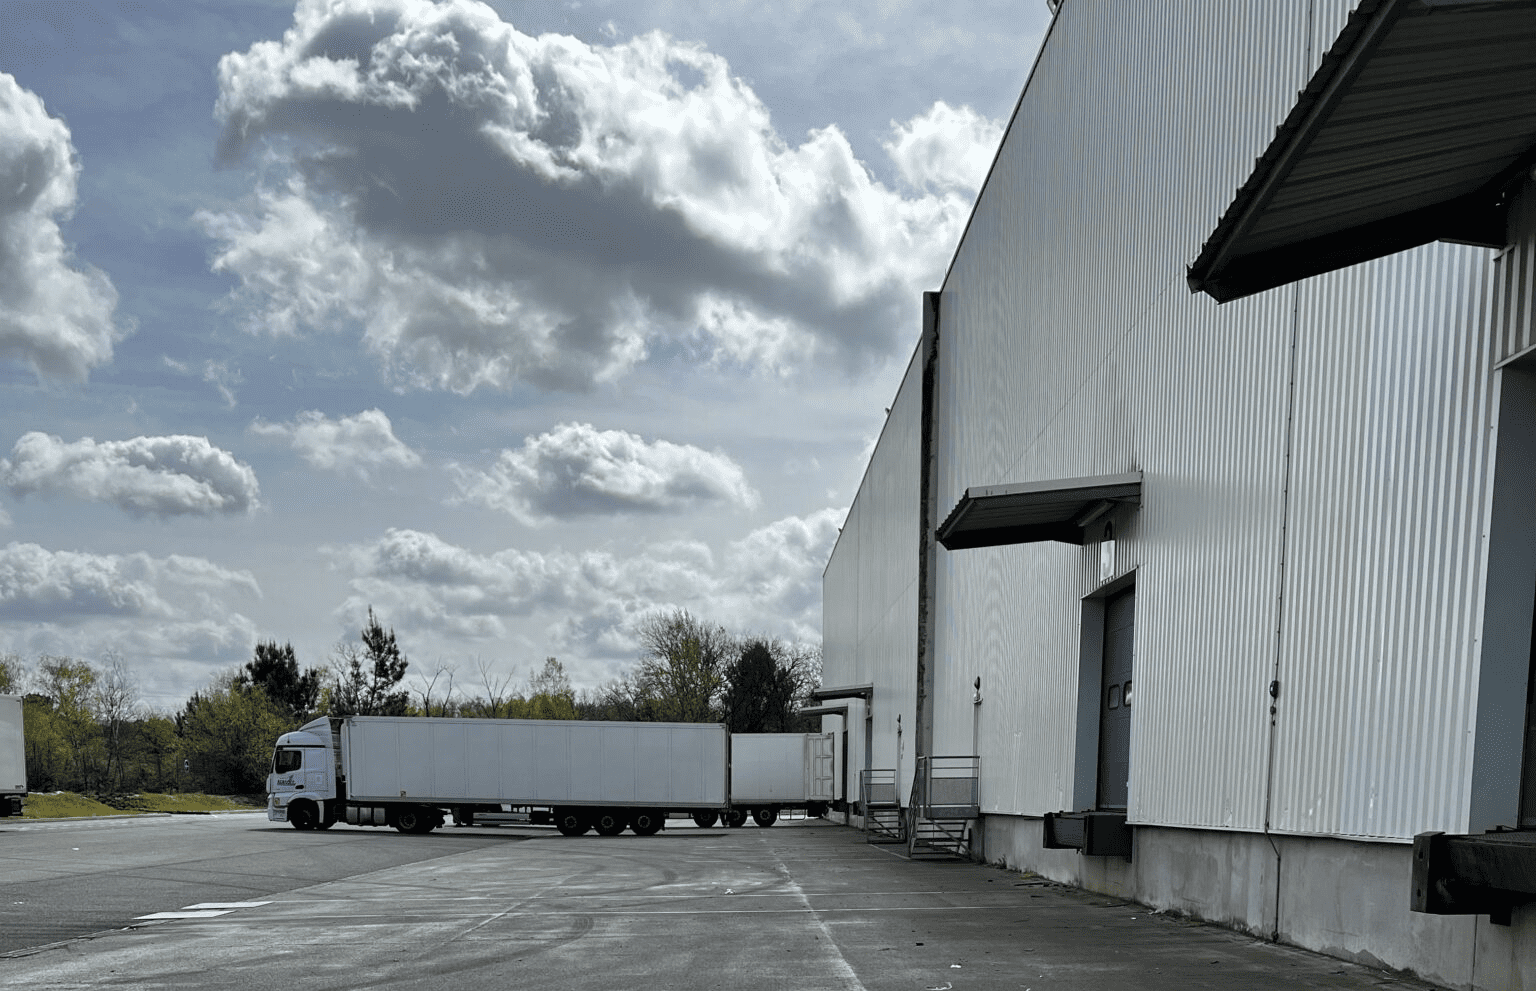 Exterior of GLP Park Cestas 2 showing trucks lined up at loading bays under a cloudy sky